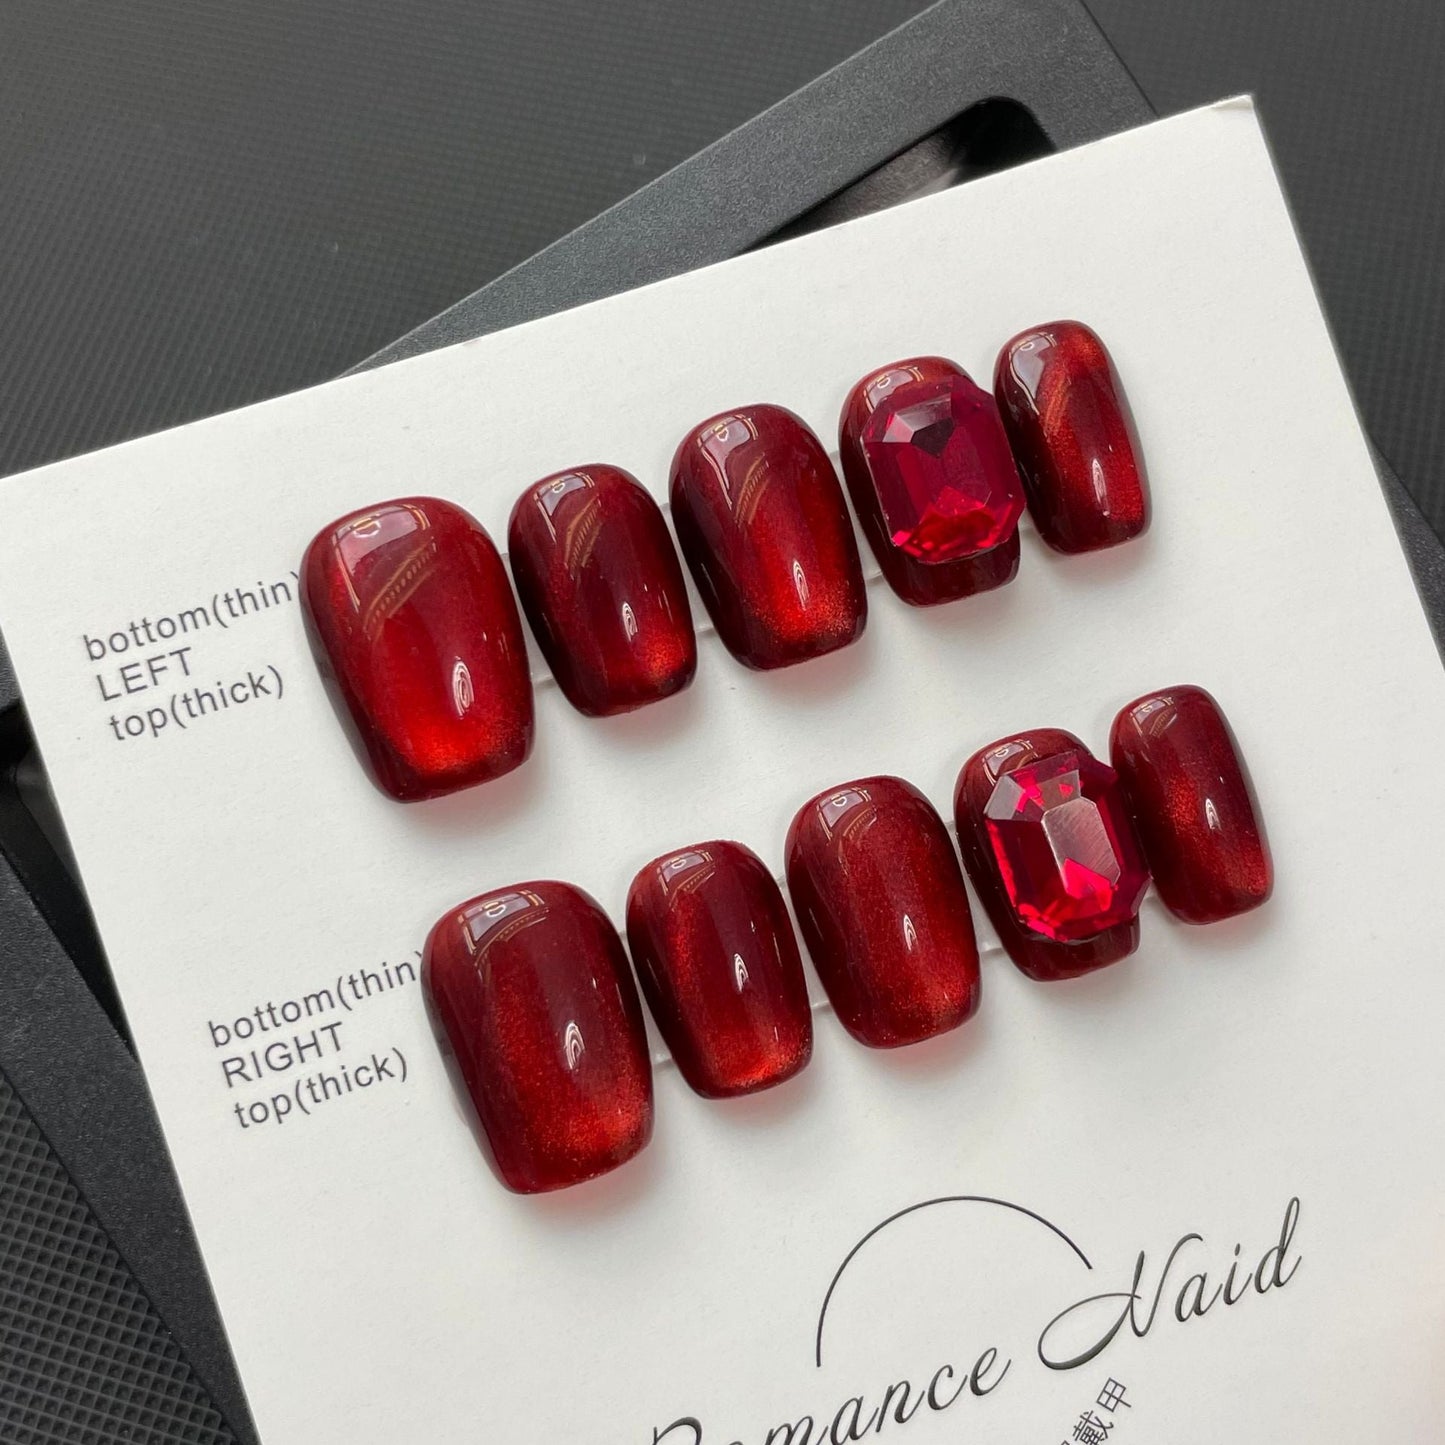 588 Red Cateye Effect press on nails 100% handmade false nails red